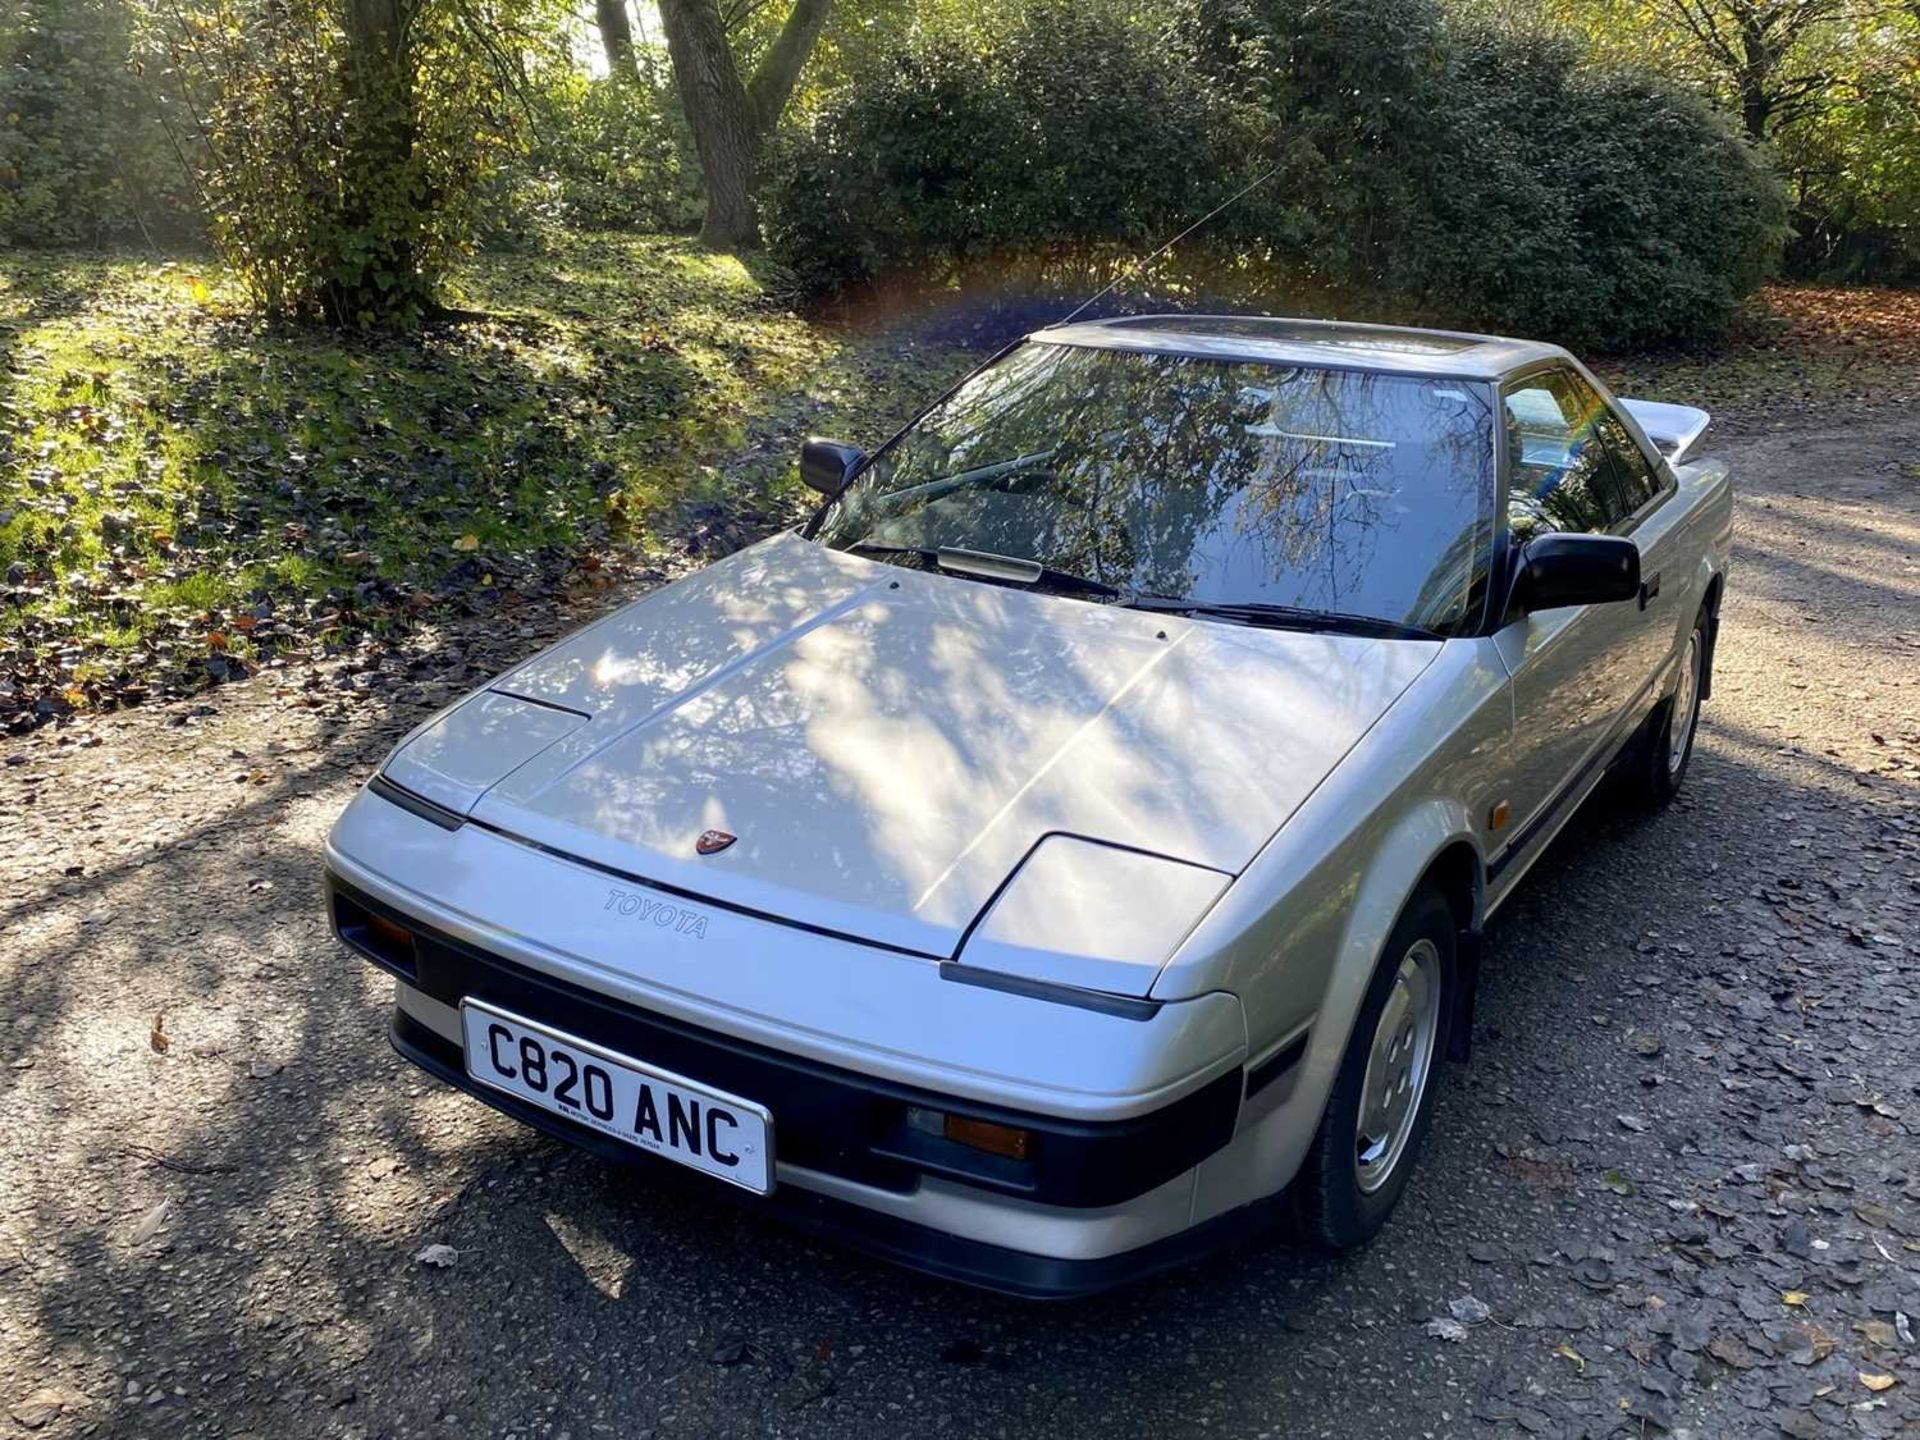 1985 Toyota MR2 Coupe Restored example of an appreciating modern classic - Image 8 of 100